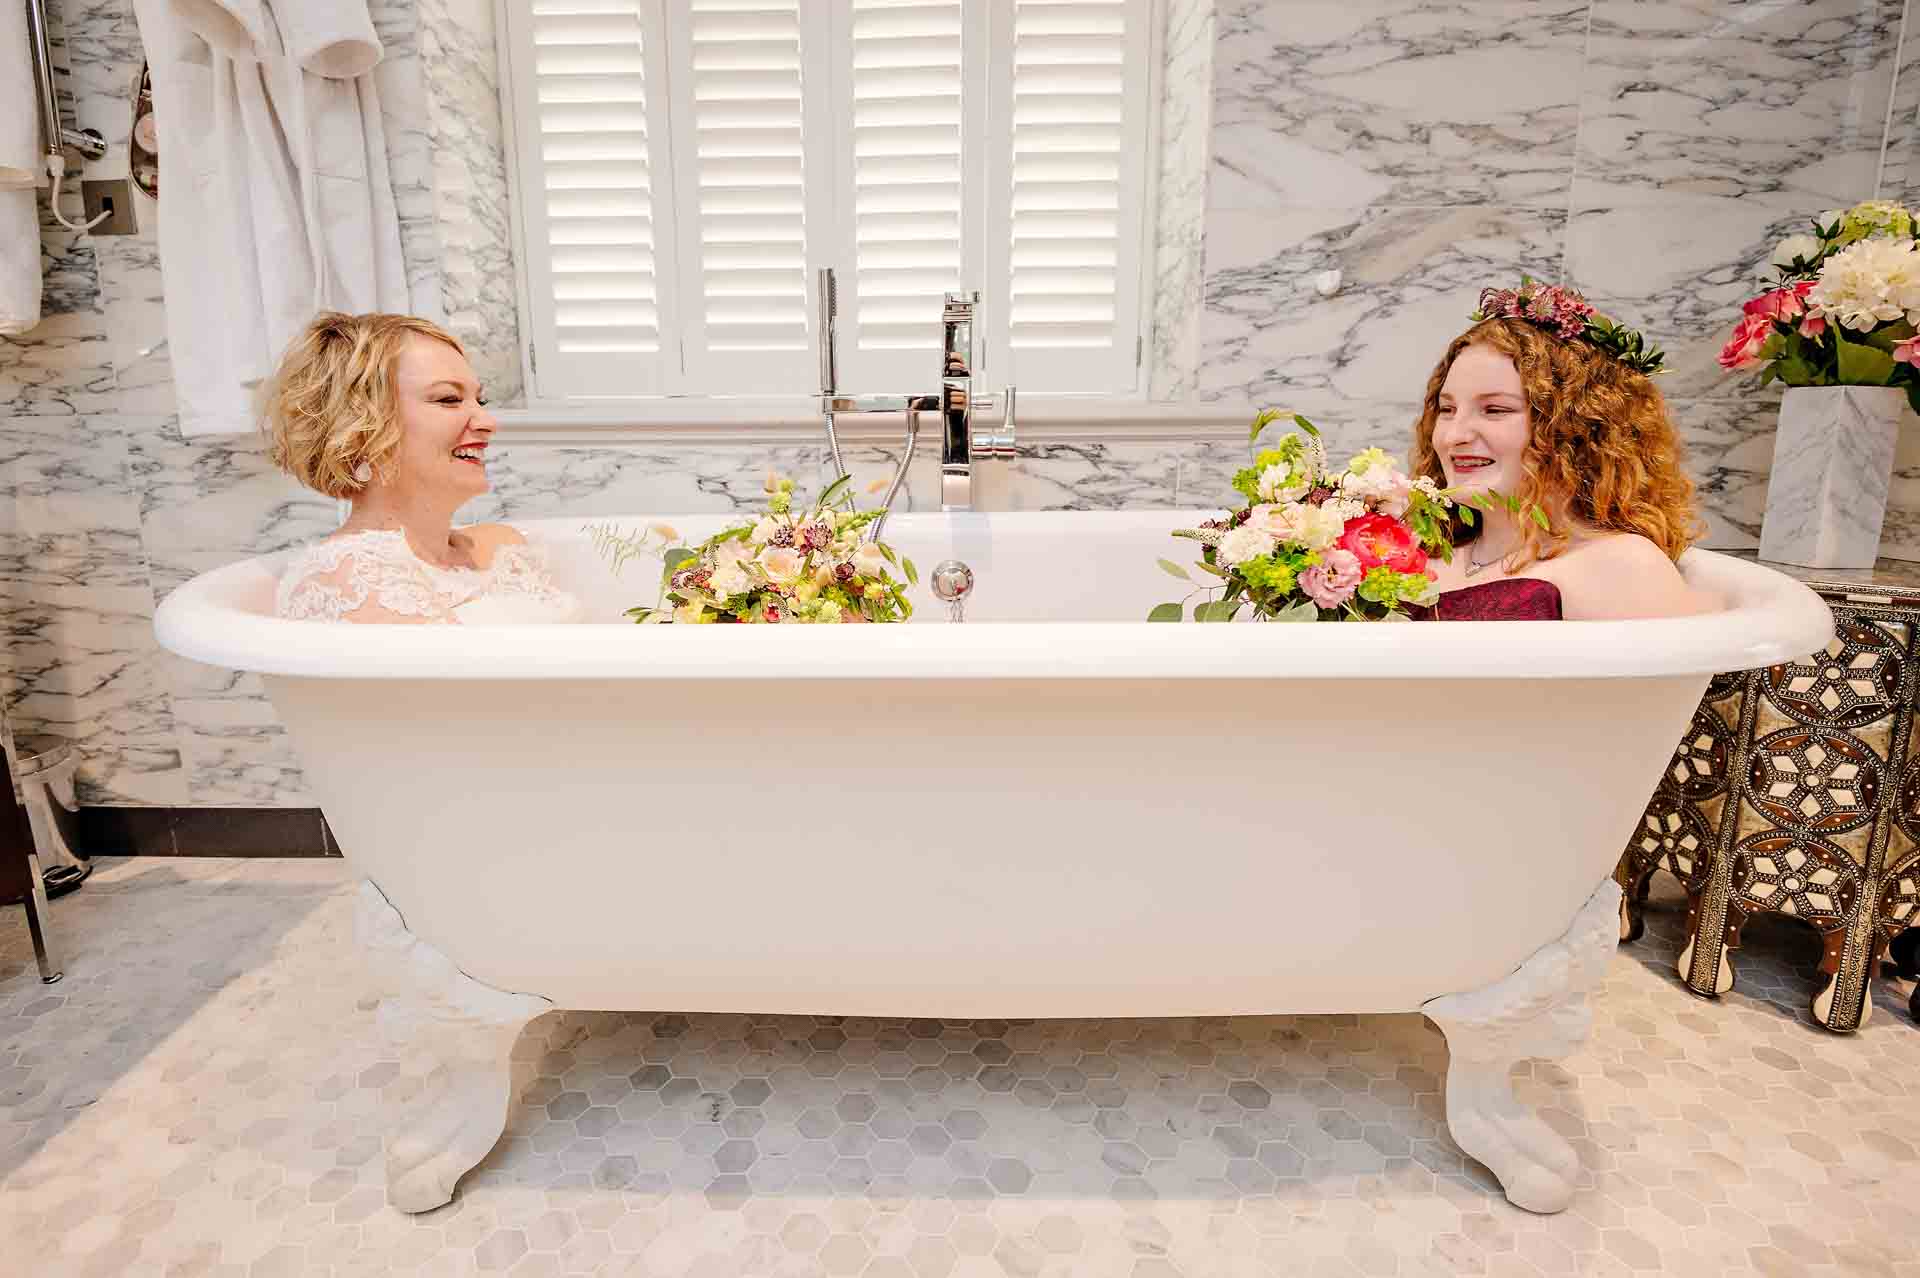 Bride with Bridesmaid laughing in bath during wedding preparations